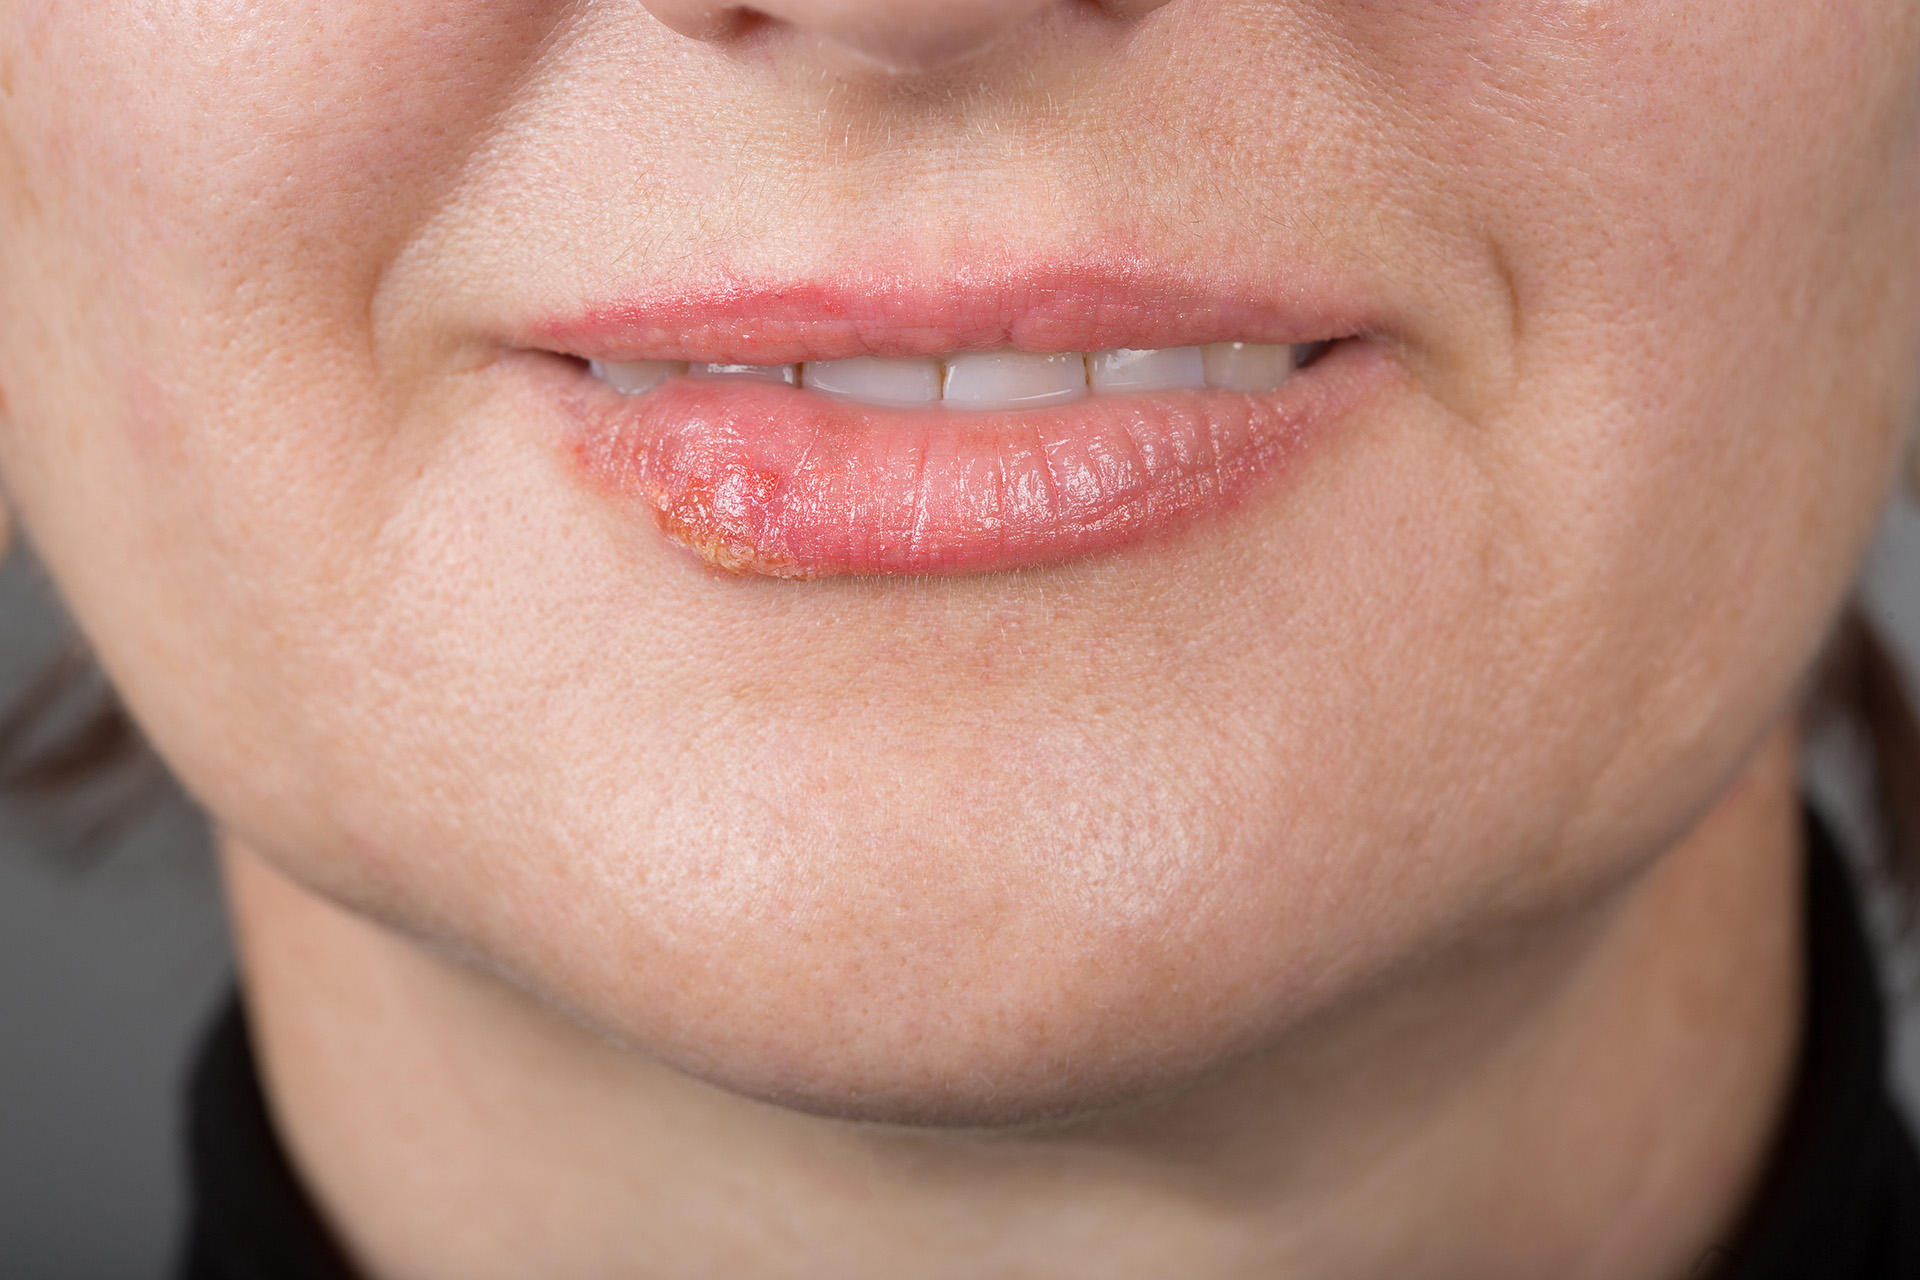 Mouth Ulcer and Canker Sores   Essential Things You Need to Know